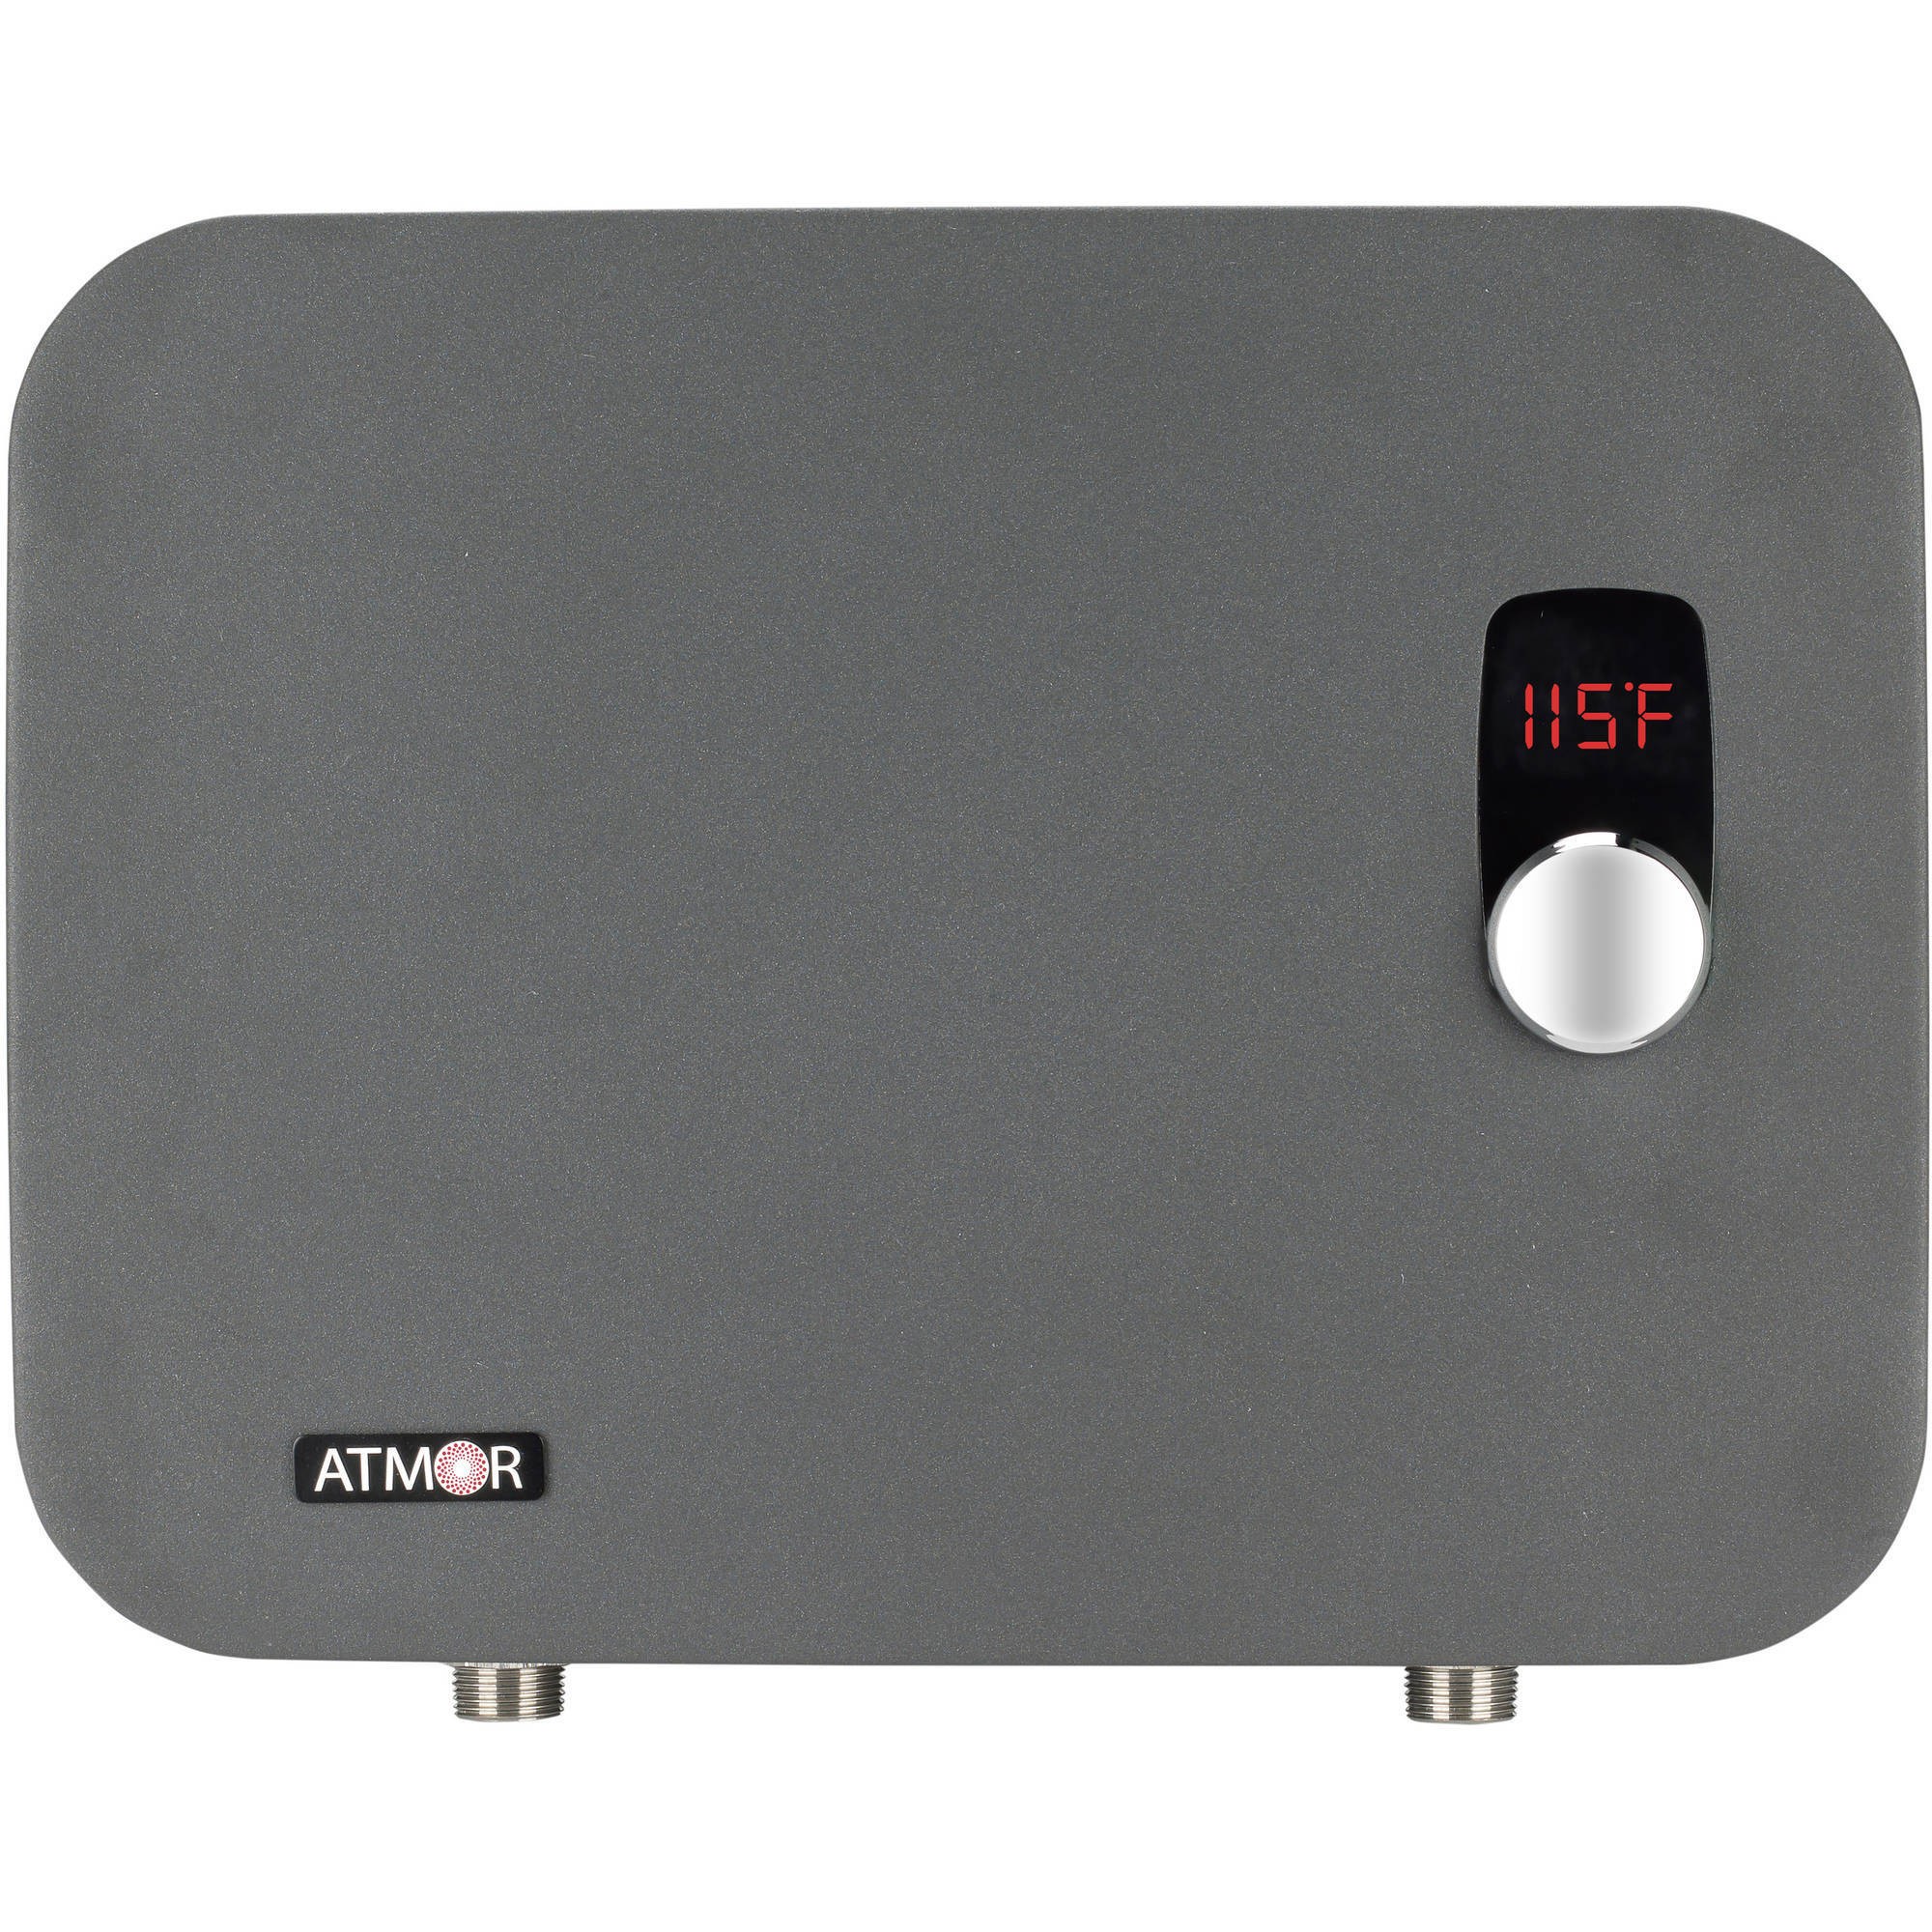 Atmor classic. Atmor select 5 KW. Atmor tap 3 KW. THERMOPRO tp27c. Atmor Classic 501.